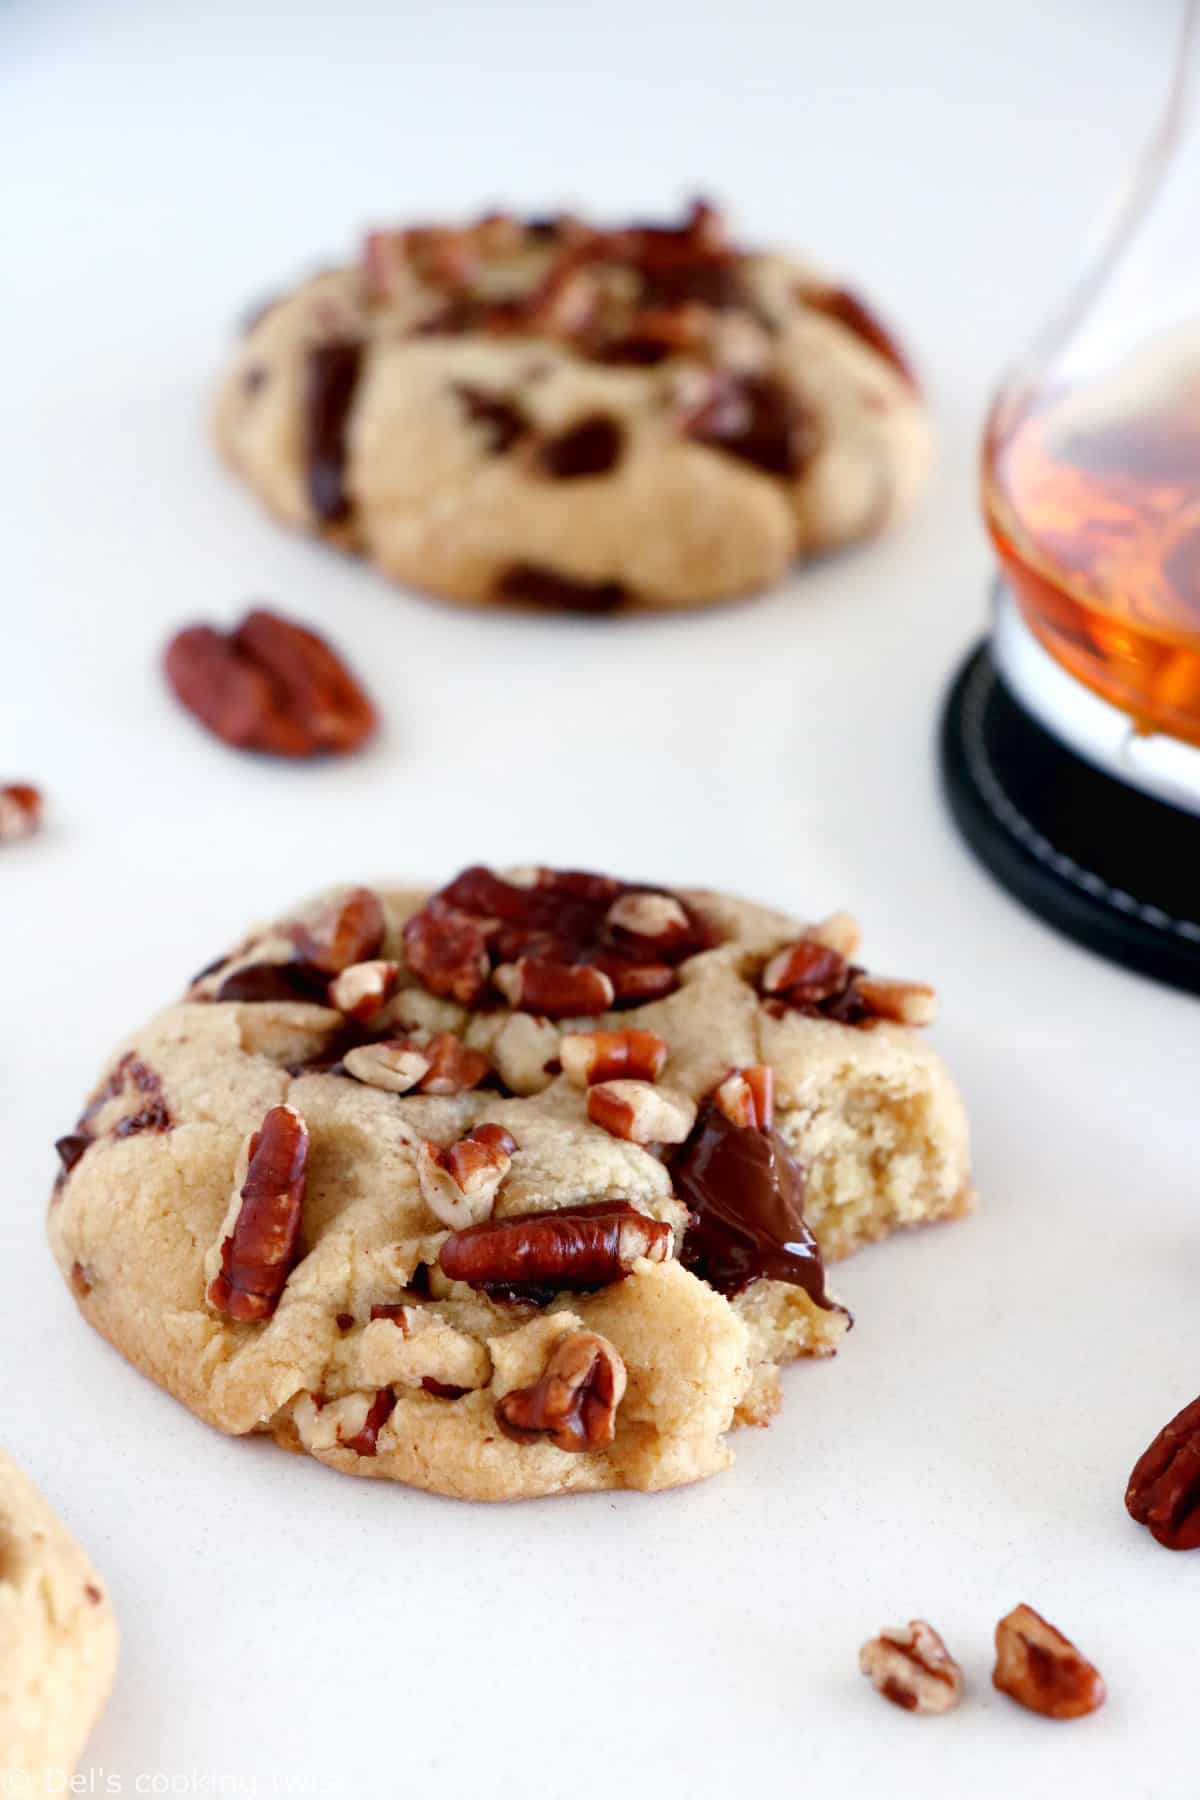 These Pecan Bourbon chocolate chunk cookies are a very festive little treat. Prepared with pecans, dark chocolate chunks and a splash of Bourbon, they are just perfect for Thanksgiving or the holiday season.